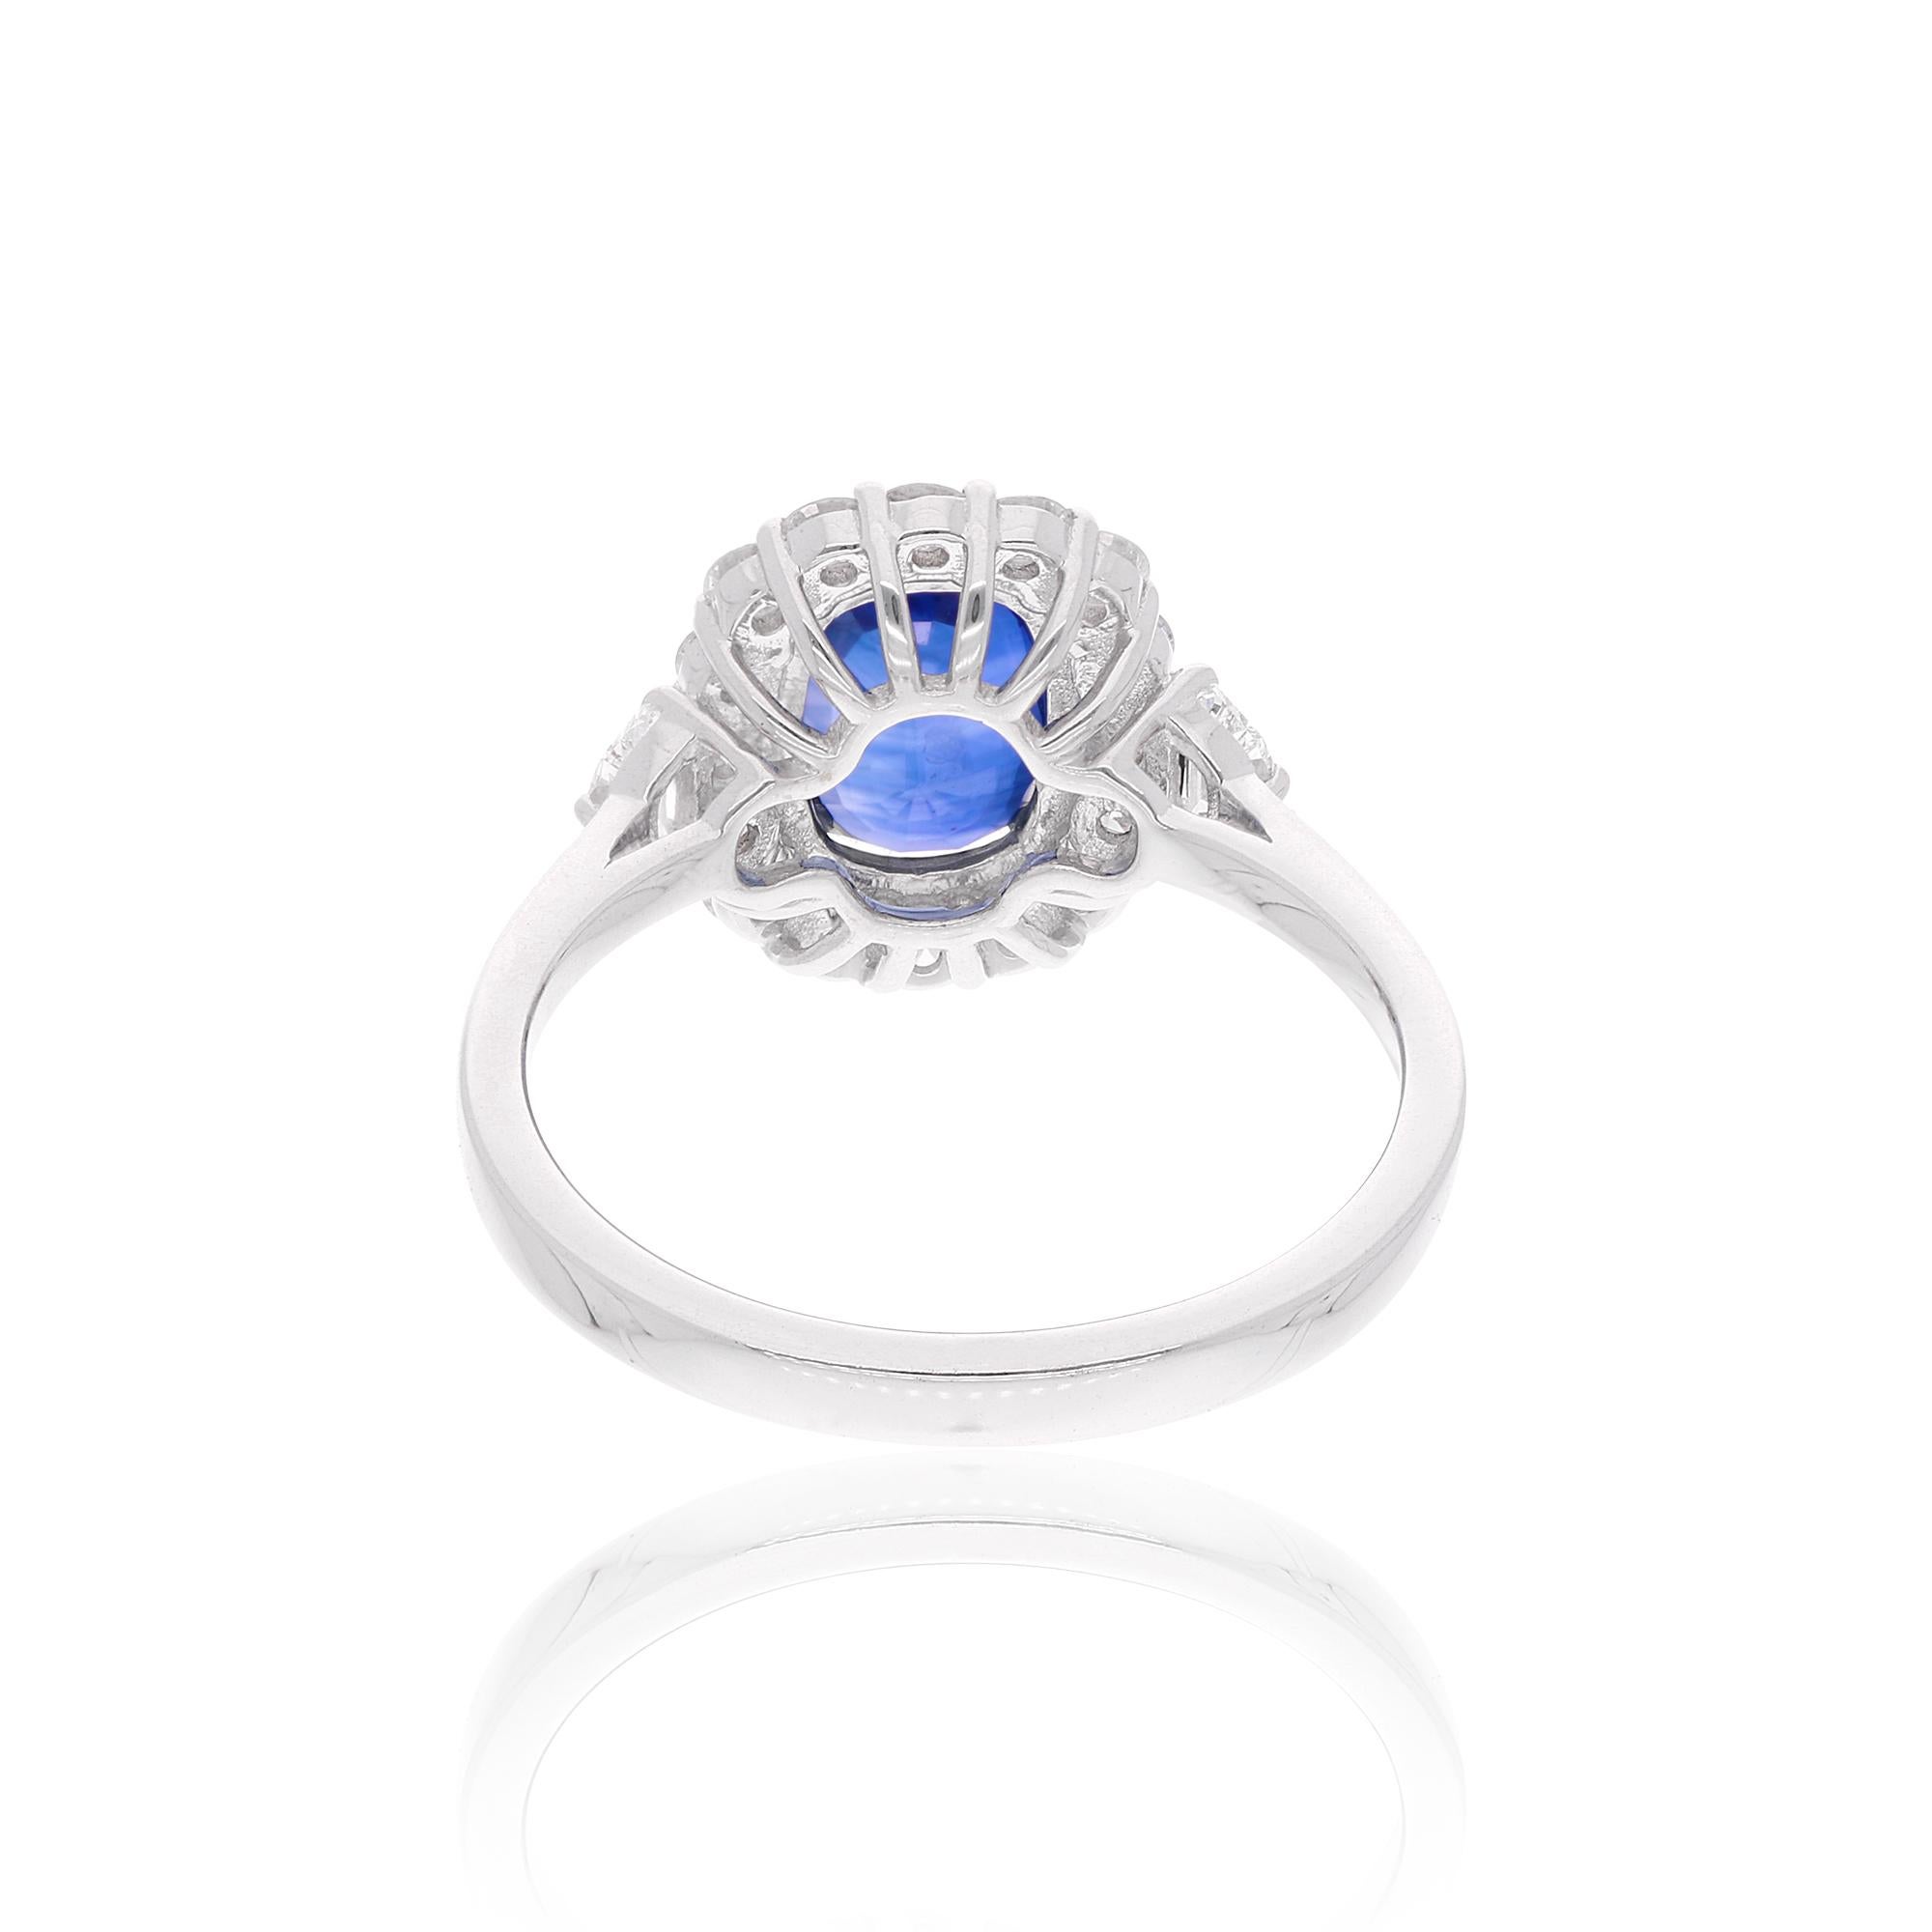 Item Code :- SER-22712
Gross Wt. :- 3.94 gm
18k Solid White Gold Wt. :- 3.44 gm
Natural Diamond Wt. :- 0.66 Ct. ( AVERAGE DIAMOND CLARITY SI1-SI2 & COLOR H-I )
Natural Blue Sapphire Wt. :- 1.86 Ct.
Ring Size :- 7 US & All size available

✦